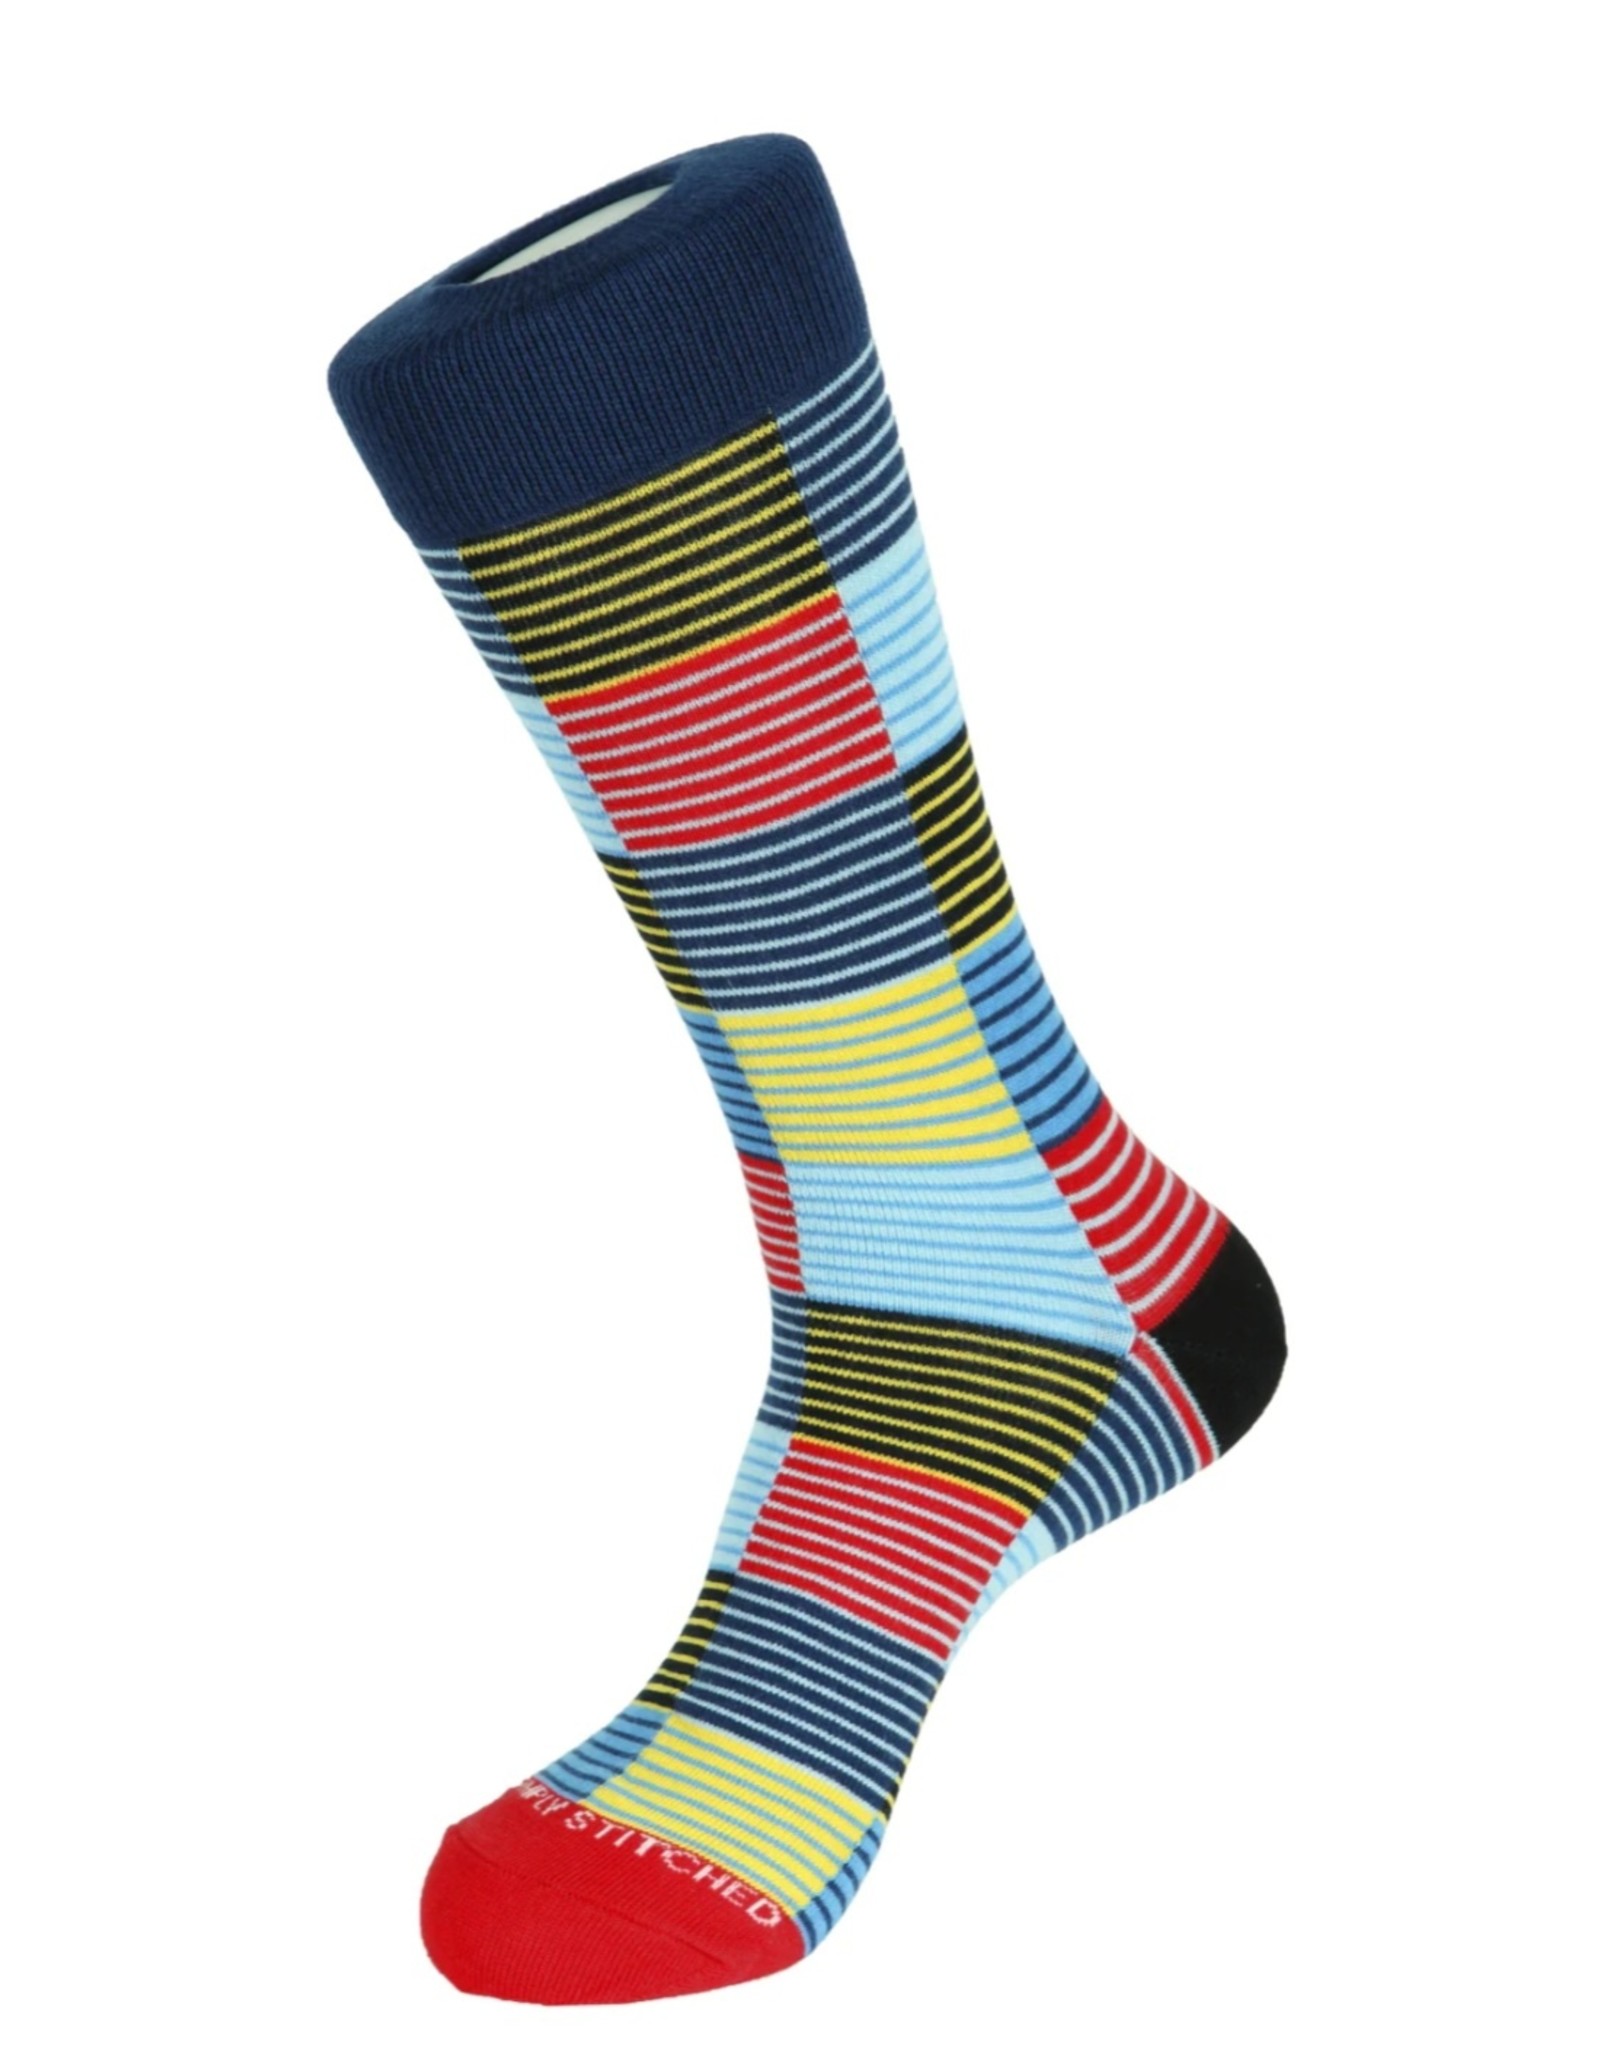 Unsimply Stitched Unsimply Stitched Men's Mini Stripe Check Sock